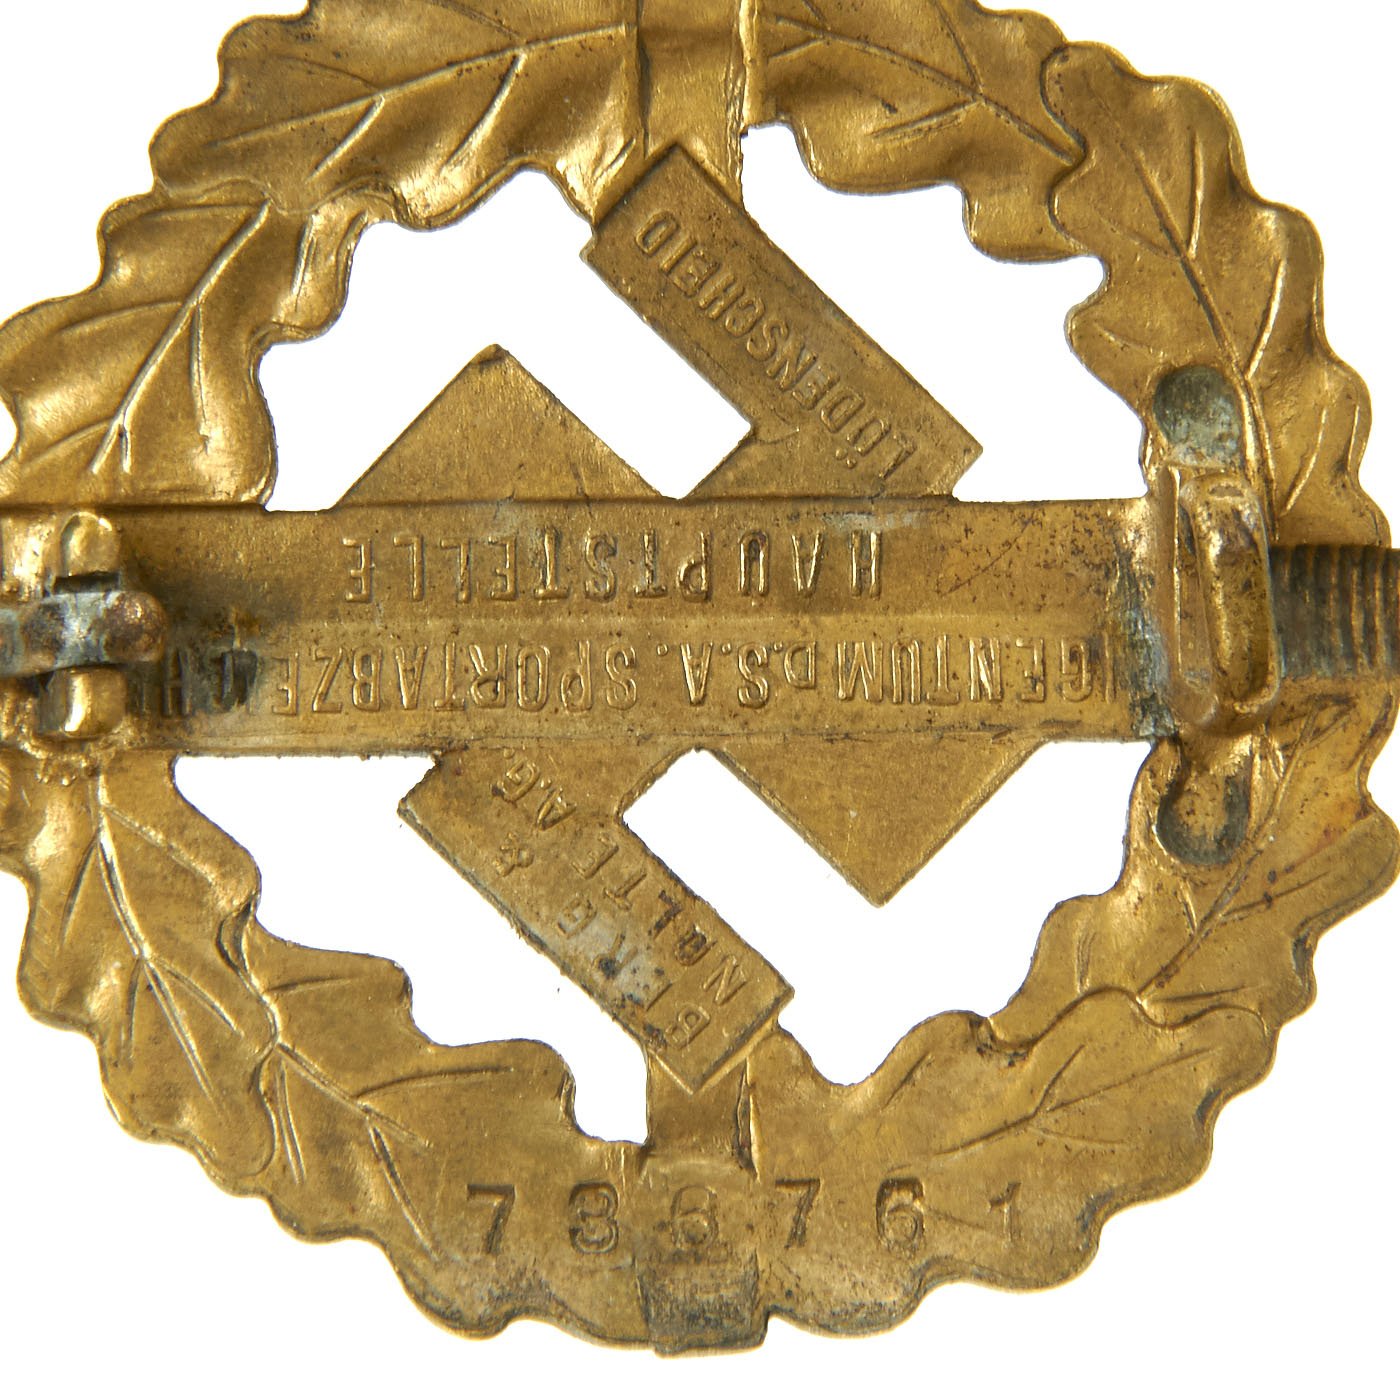 Original Berg Badge in & Gold Military Antiques German International SA Nolte WWII Sports A.G – by Grade